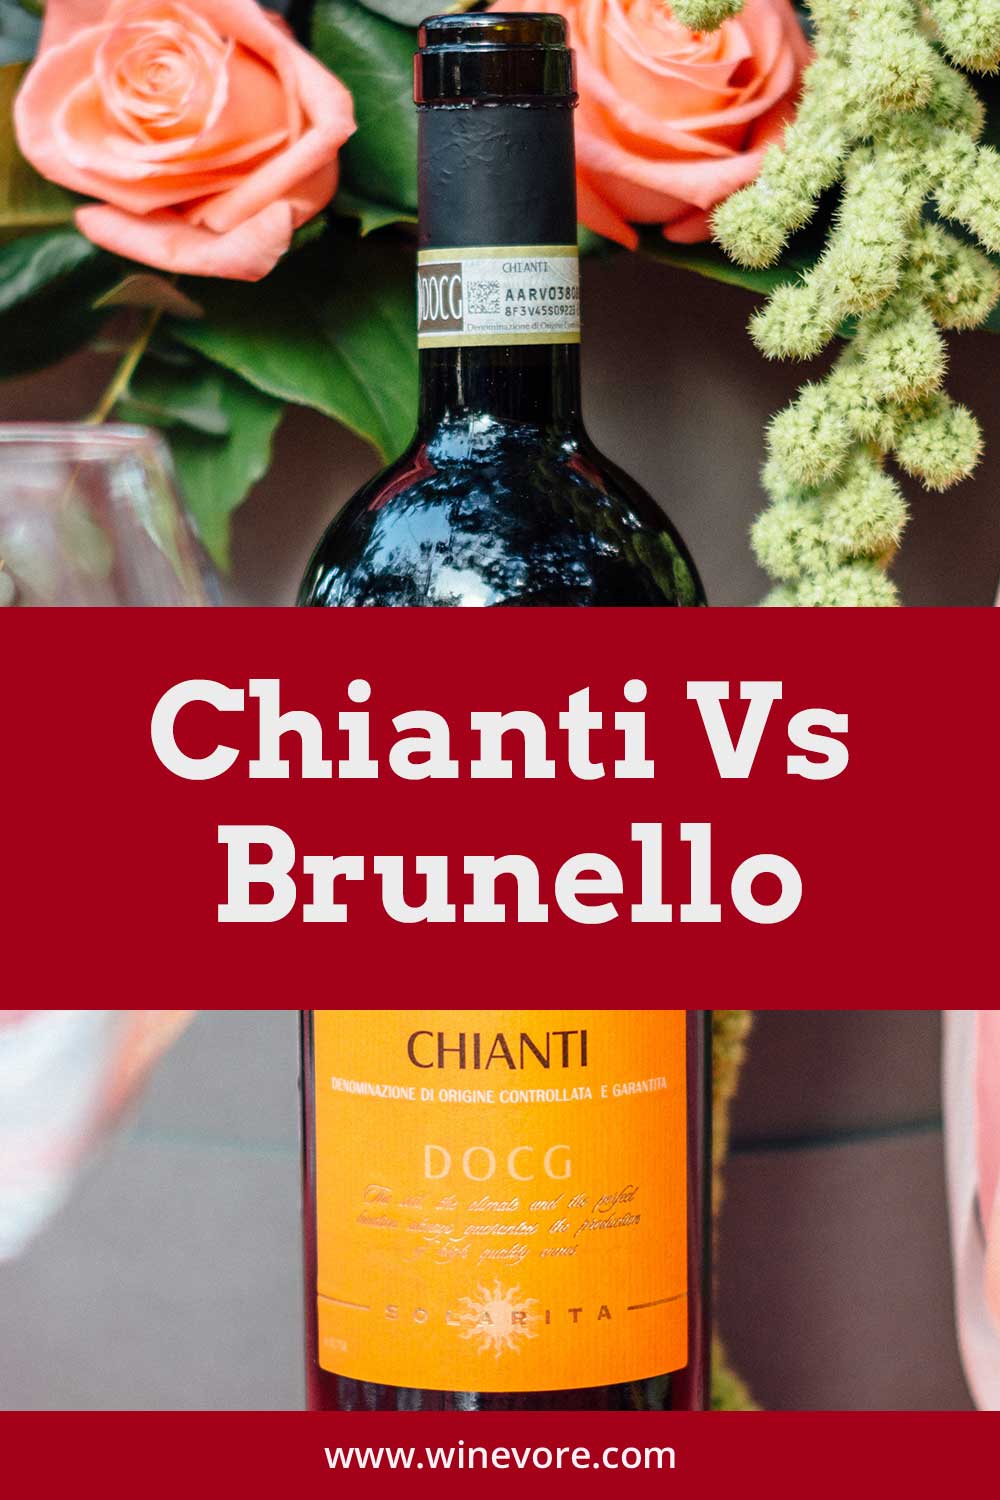 A bottle of Chianti with yellow tag on it - Chianti Vs. Brunello